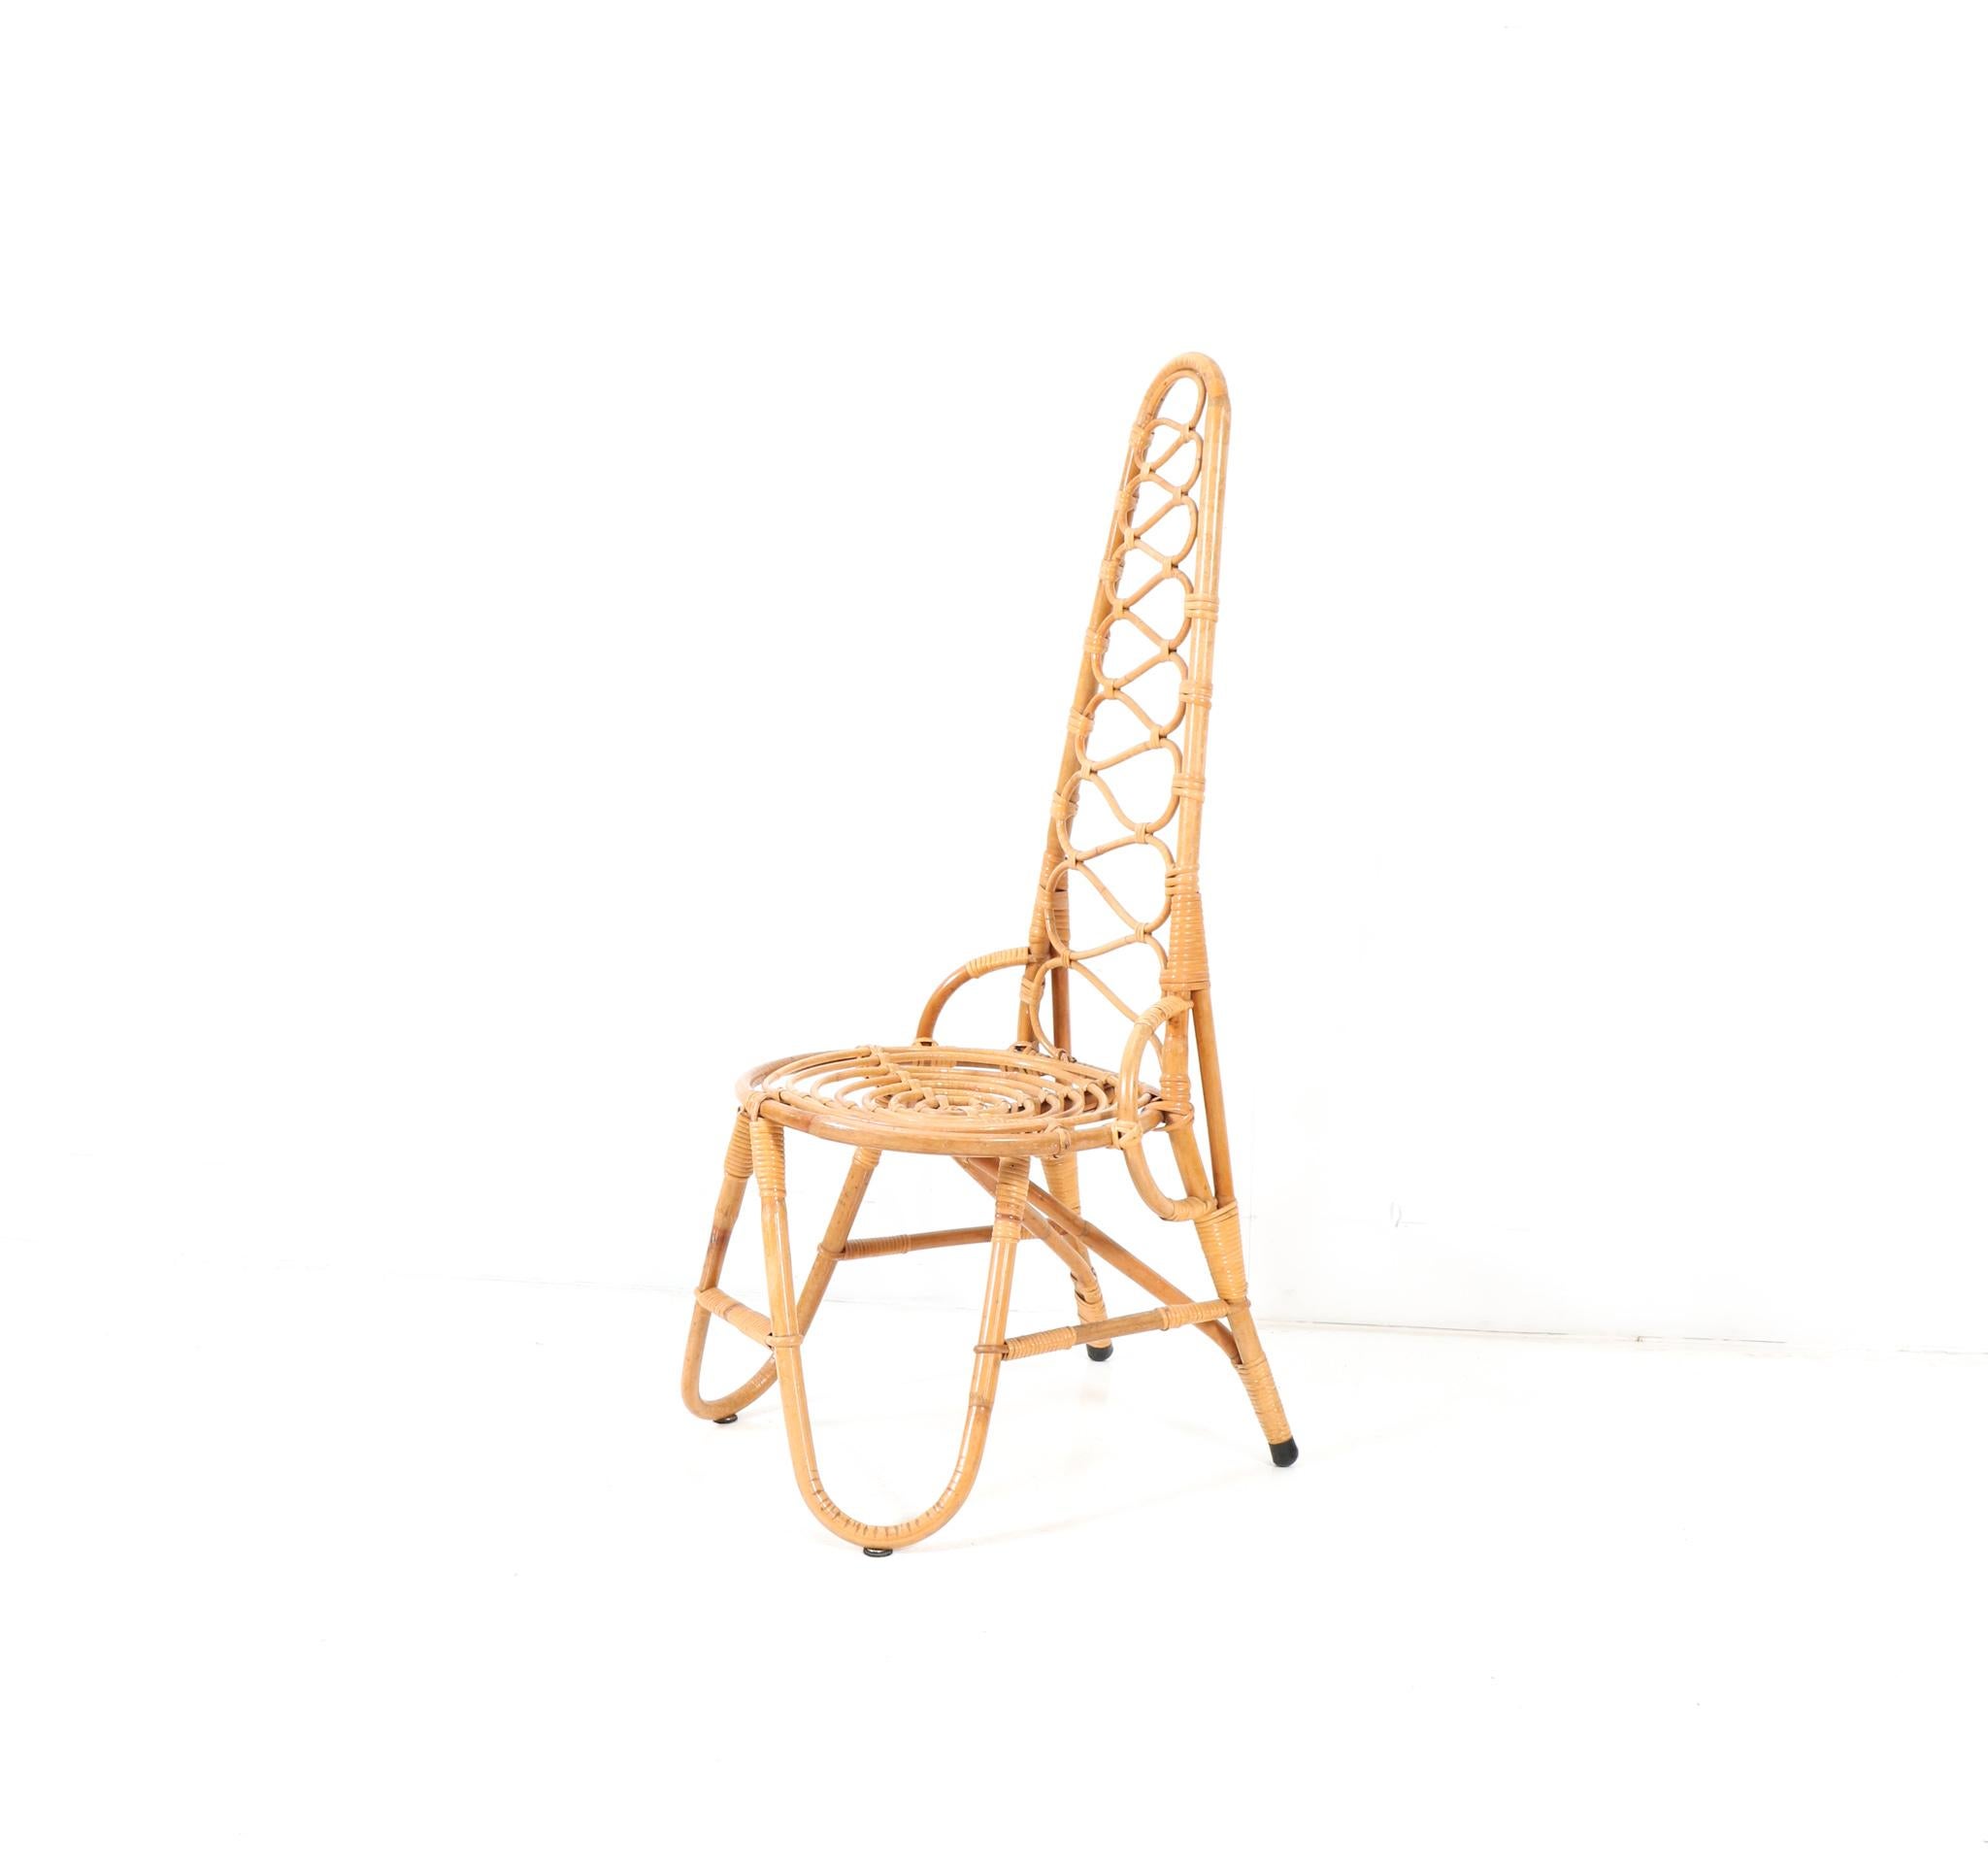 Stunning and elegant Mid-Century Modern high backchair.
Design by Dirk van Sliedrecht for Rohe Noordwolde.
Striking Dutch design from the 1960s.
Bent bamboo and rattan frame and seat.
This wonderful Mid-Century Modern high back chair by Dirk van